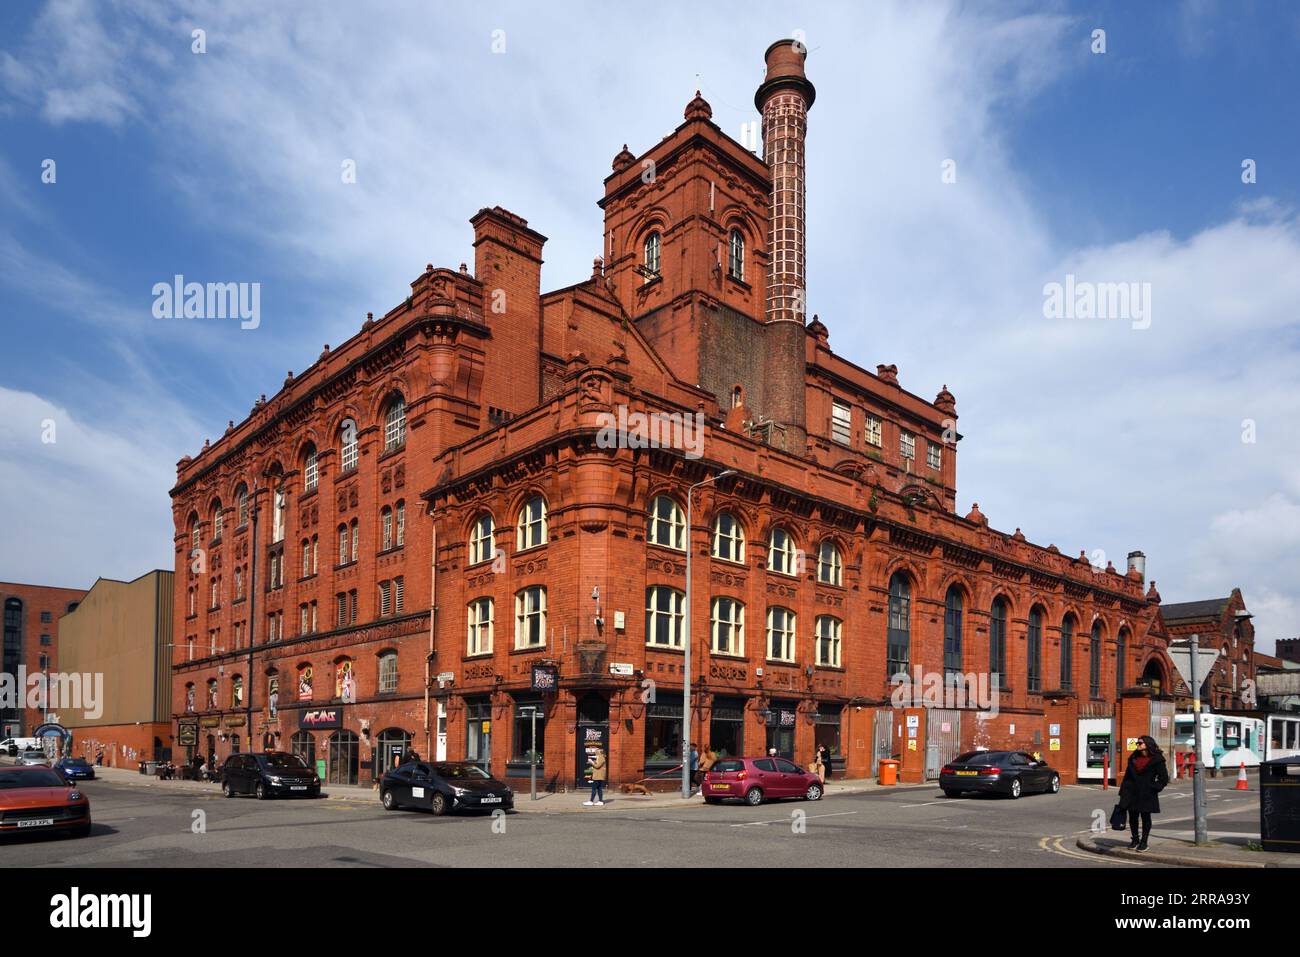 Redbrick or Red Brick Victorian Achitecture of Higsons Brewery Liverpool Stock Photo